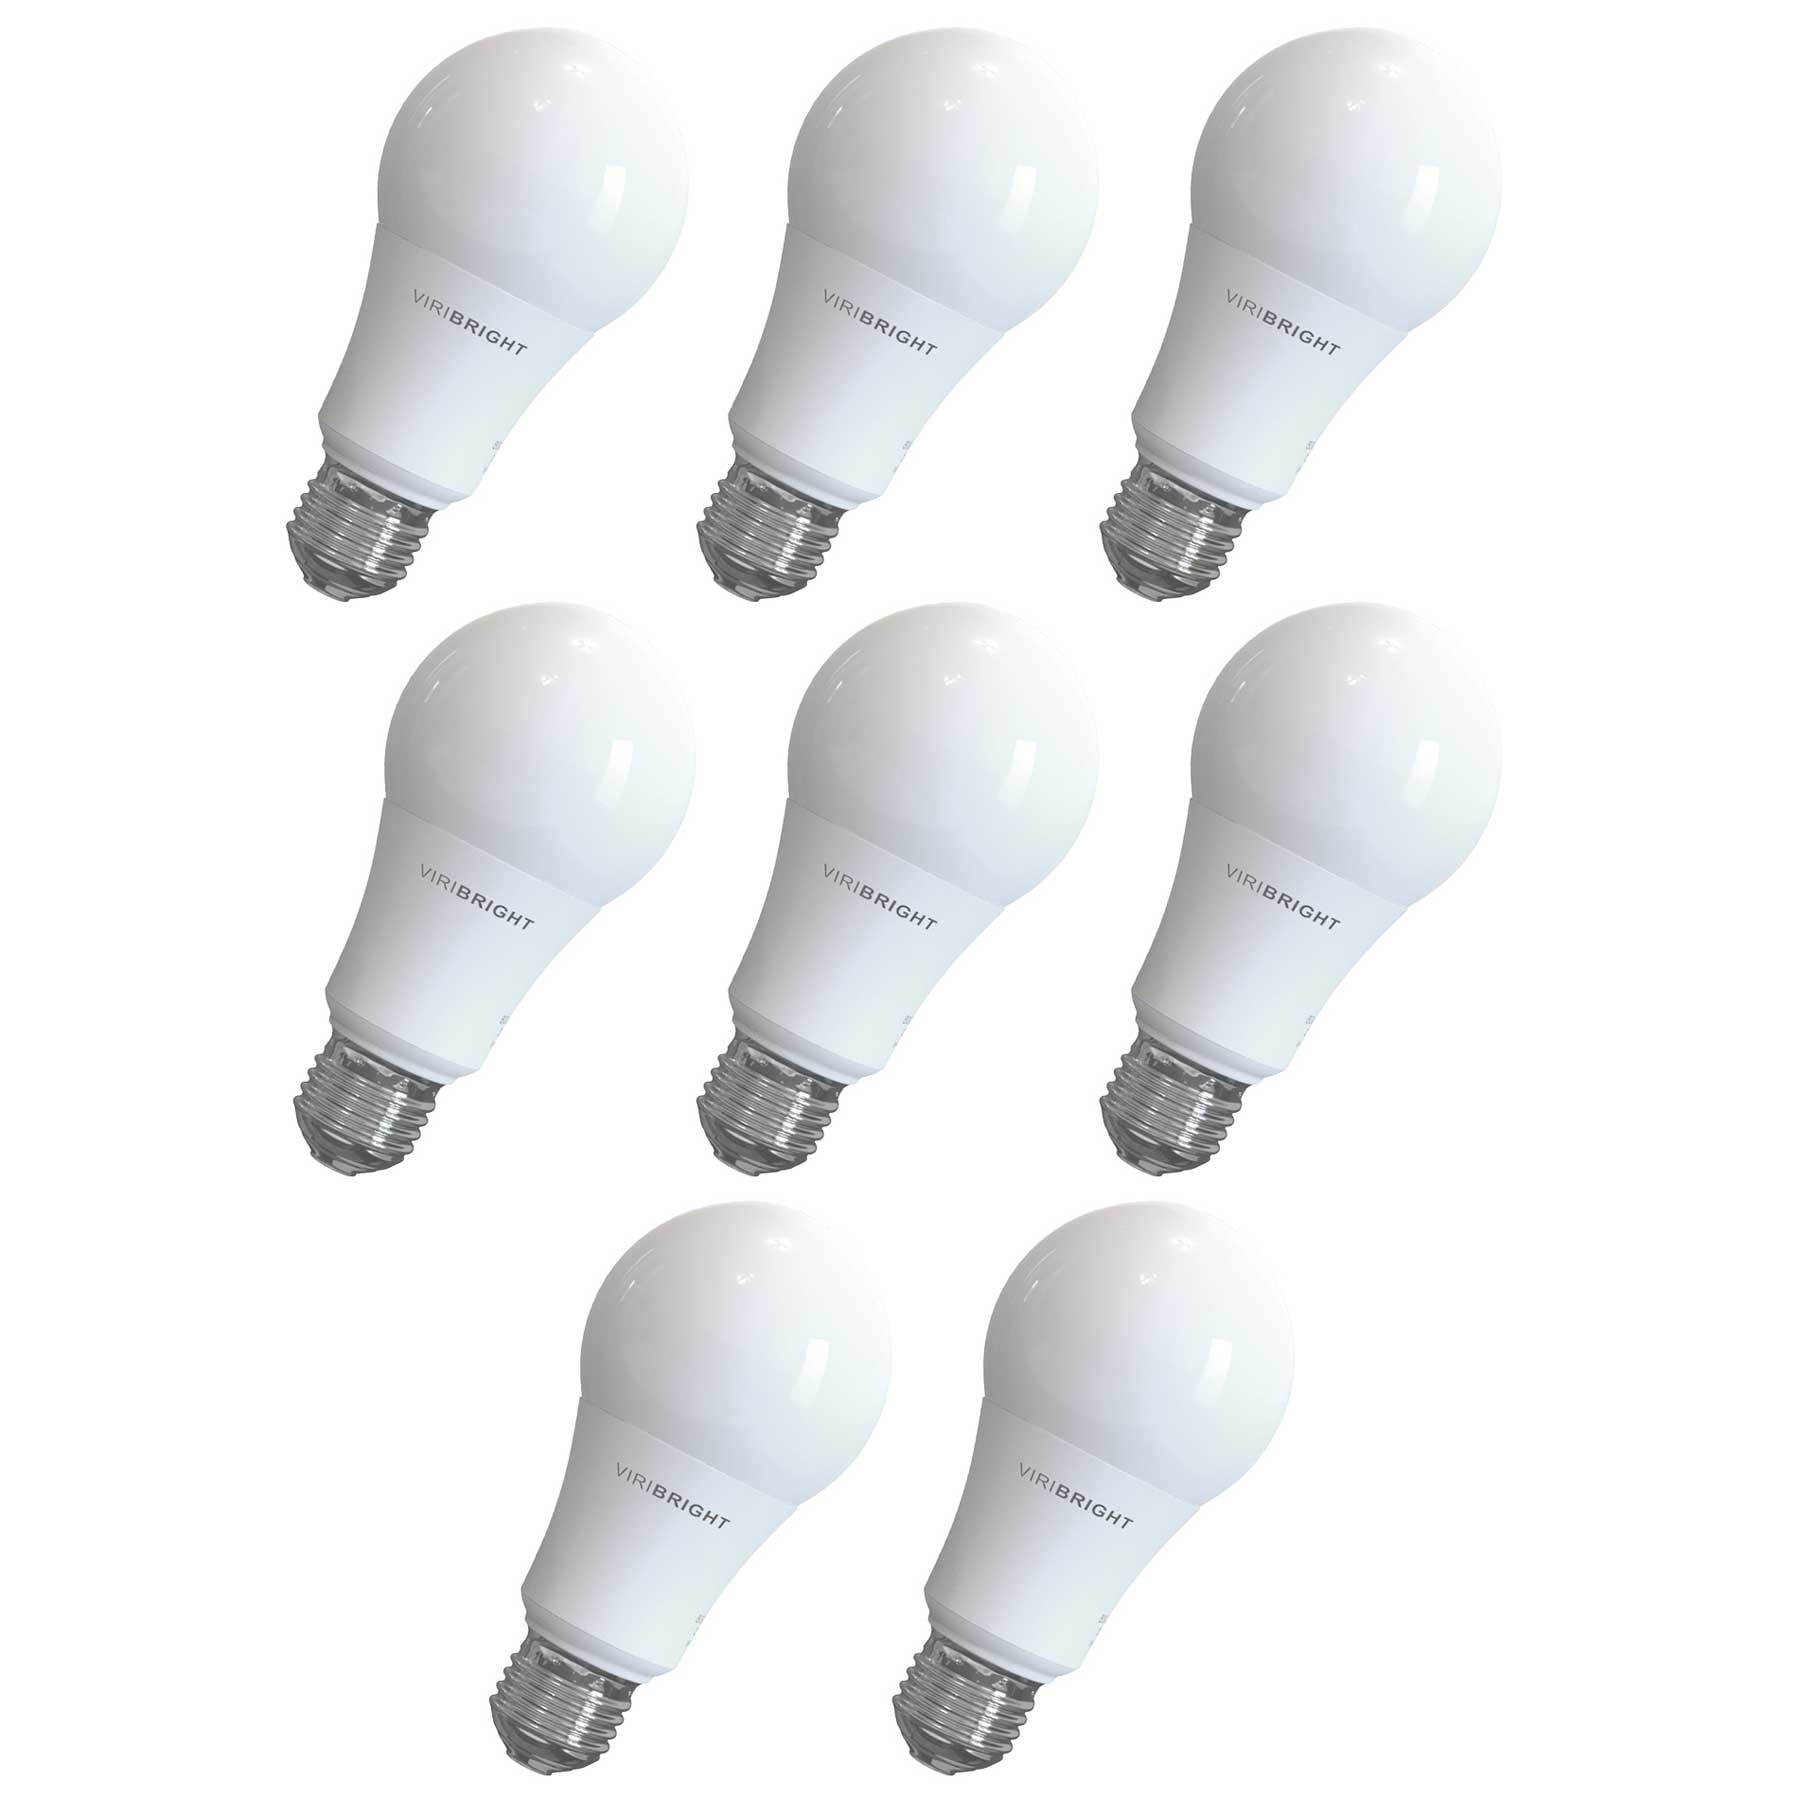 Bright and reliable LED light bulb